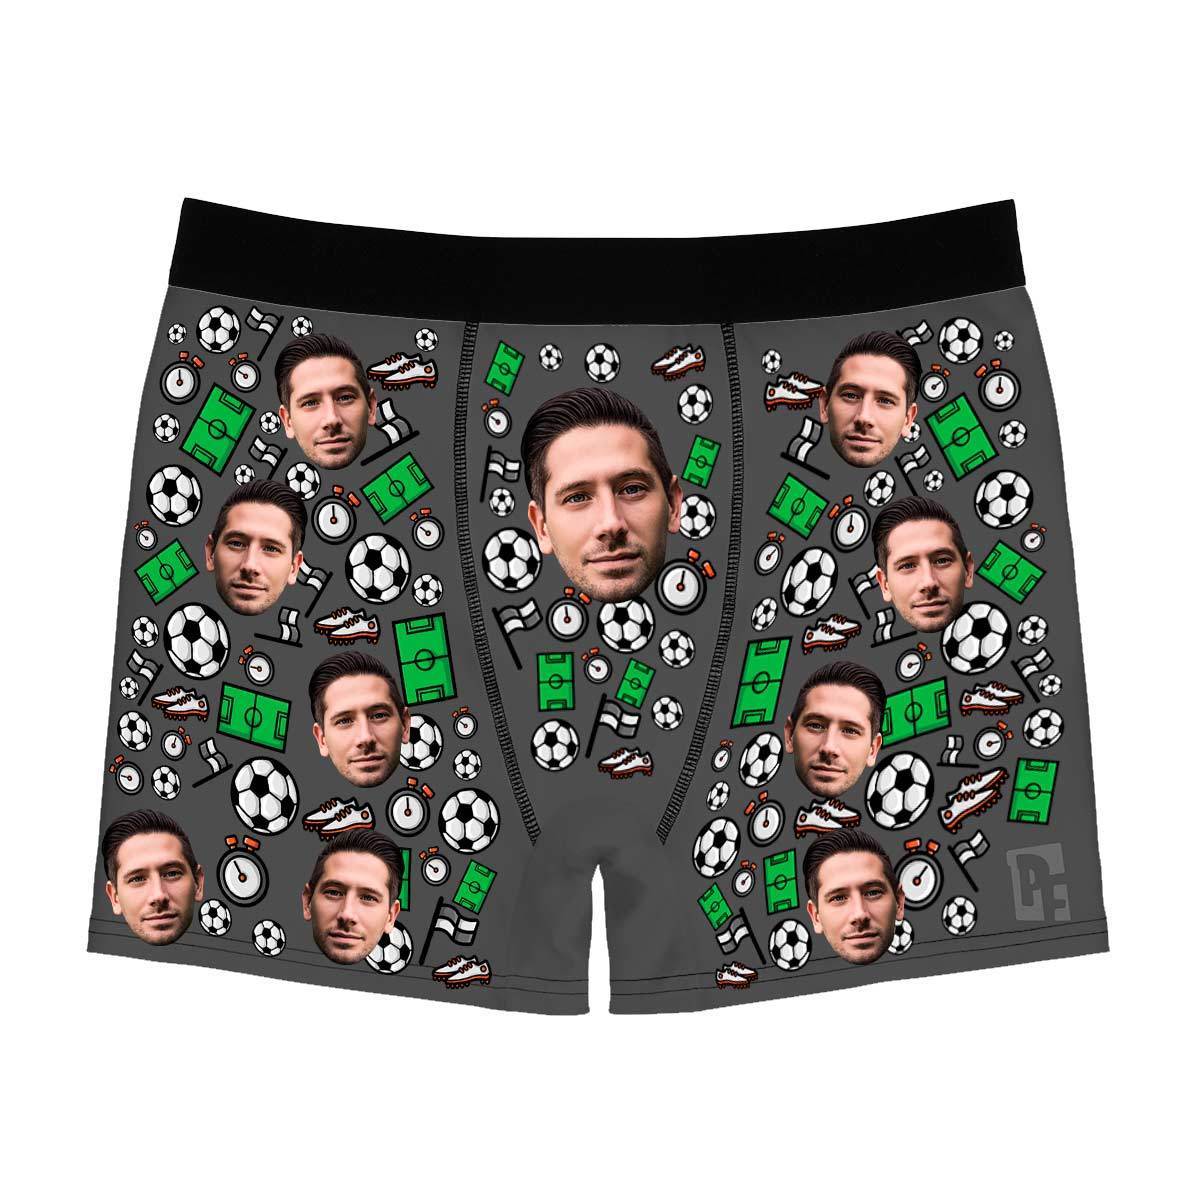 Dark Football men's boxer briefs personalized with photo printed on them